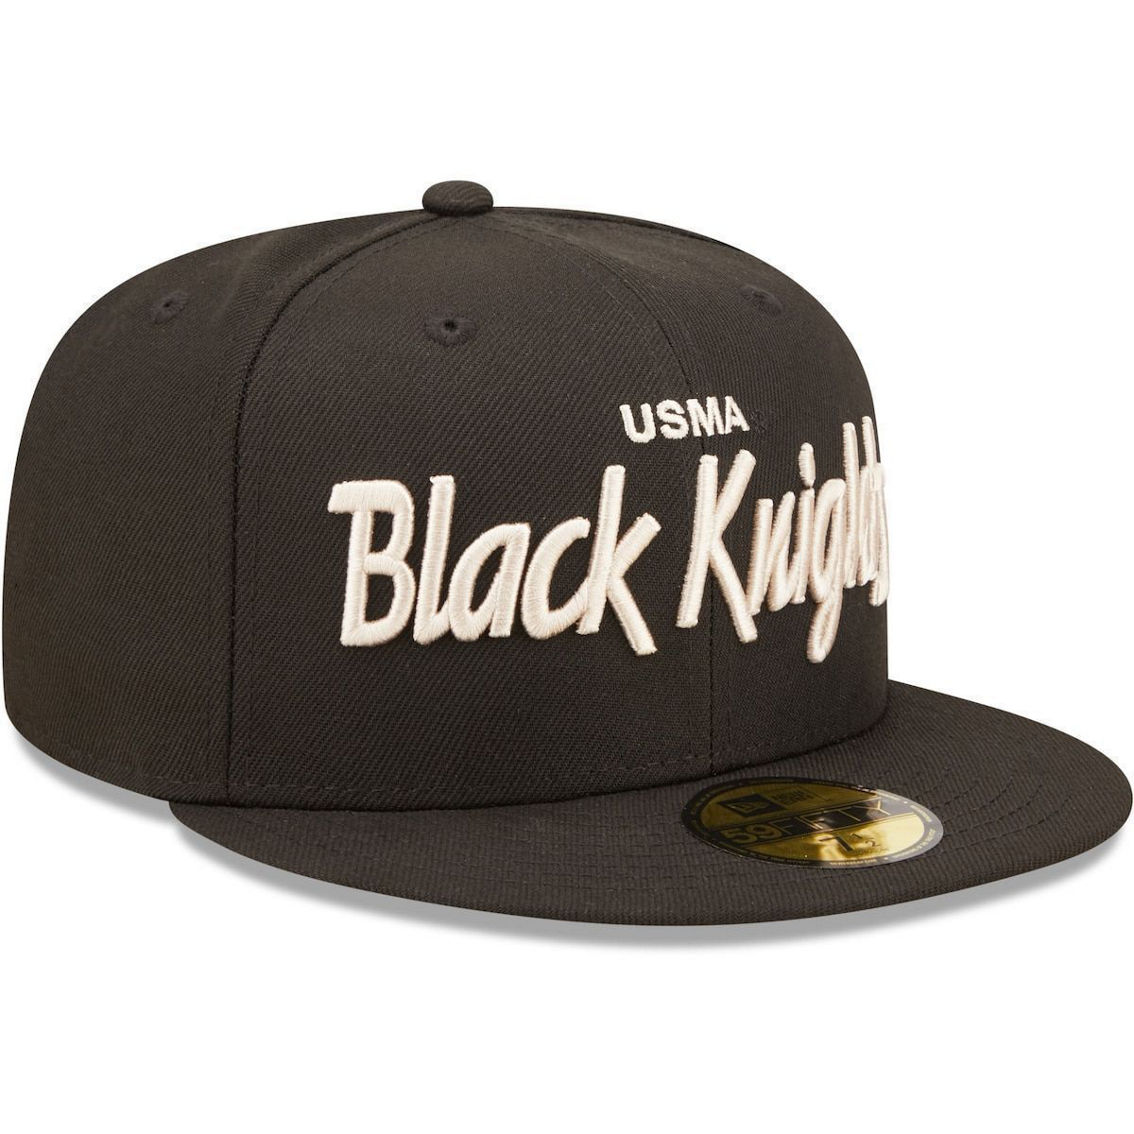 New Era Men's Black Army Black Knights Script Original 59FIFTY Fitted Hat - Image 4 of 4